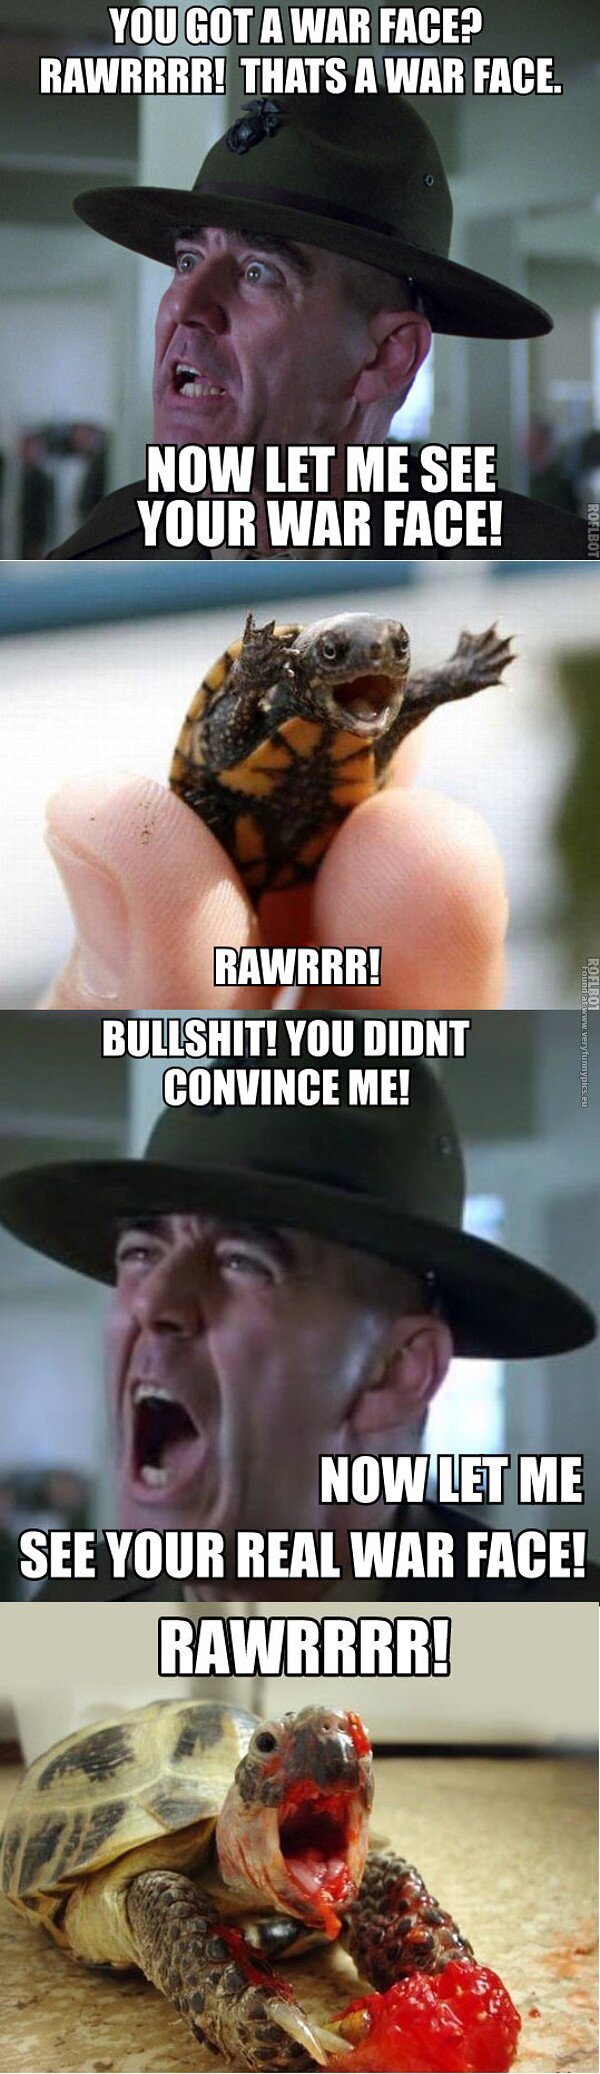 funny pictures let me see your war face turtle